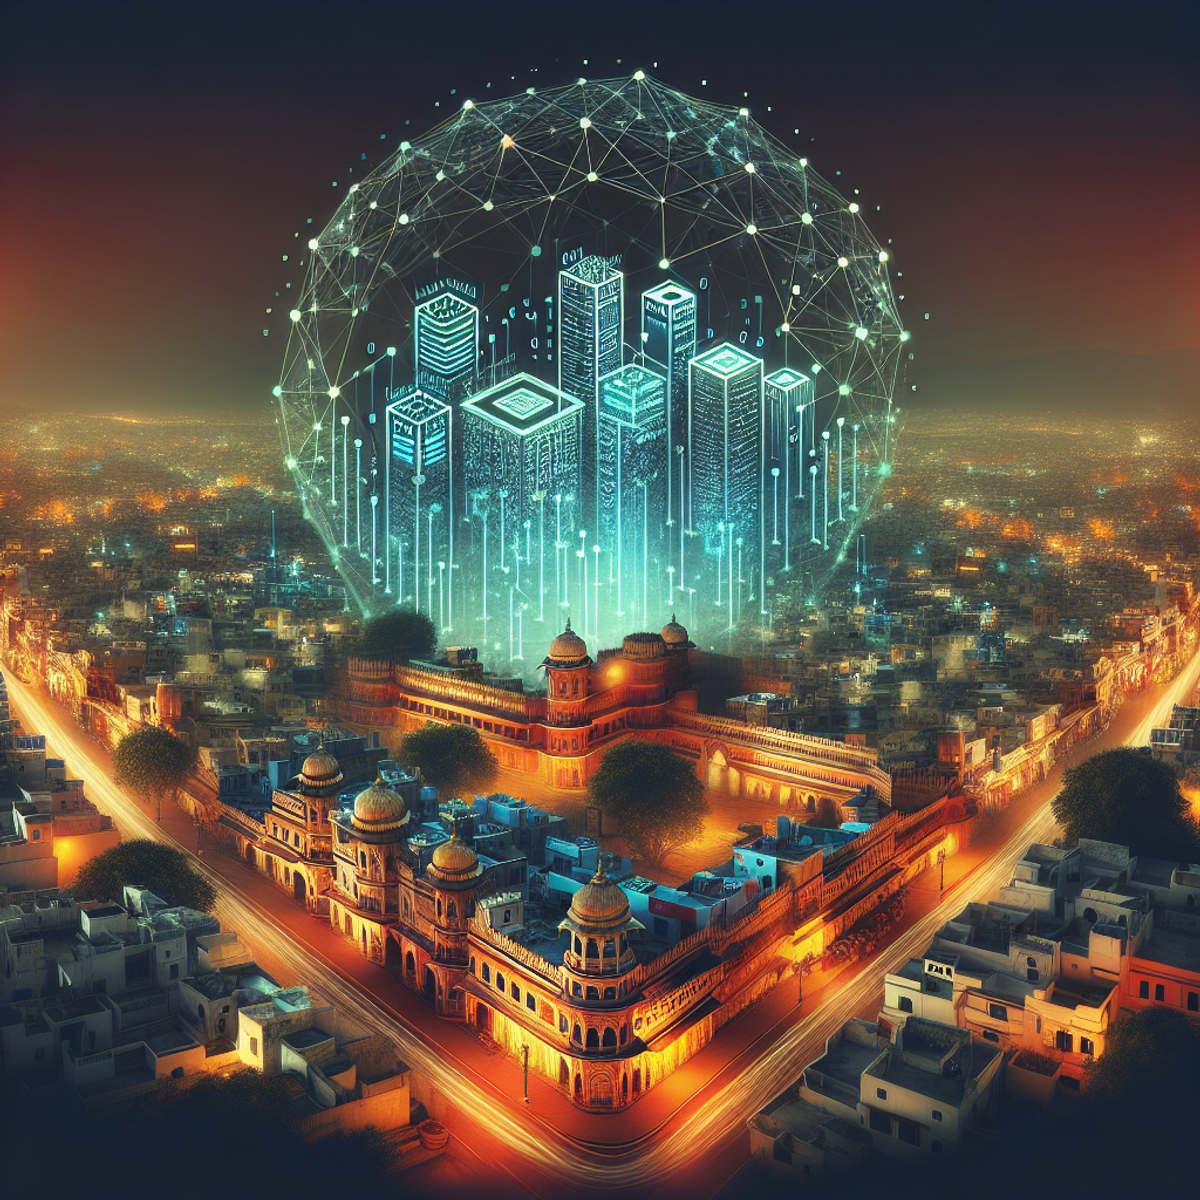 A cityscape with a web-like structure filled with tech-related symbols, representing Jaipur as a thriving tech hub.